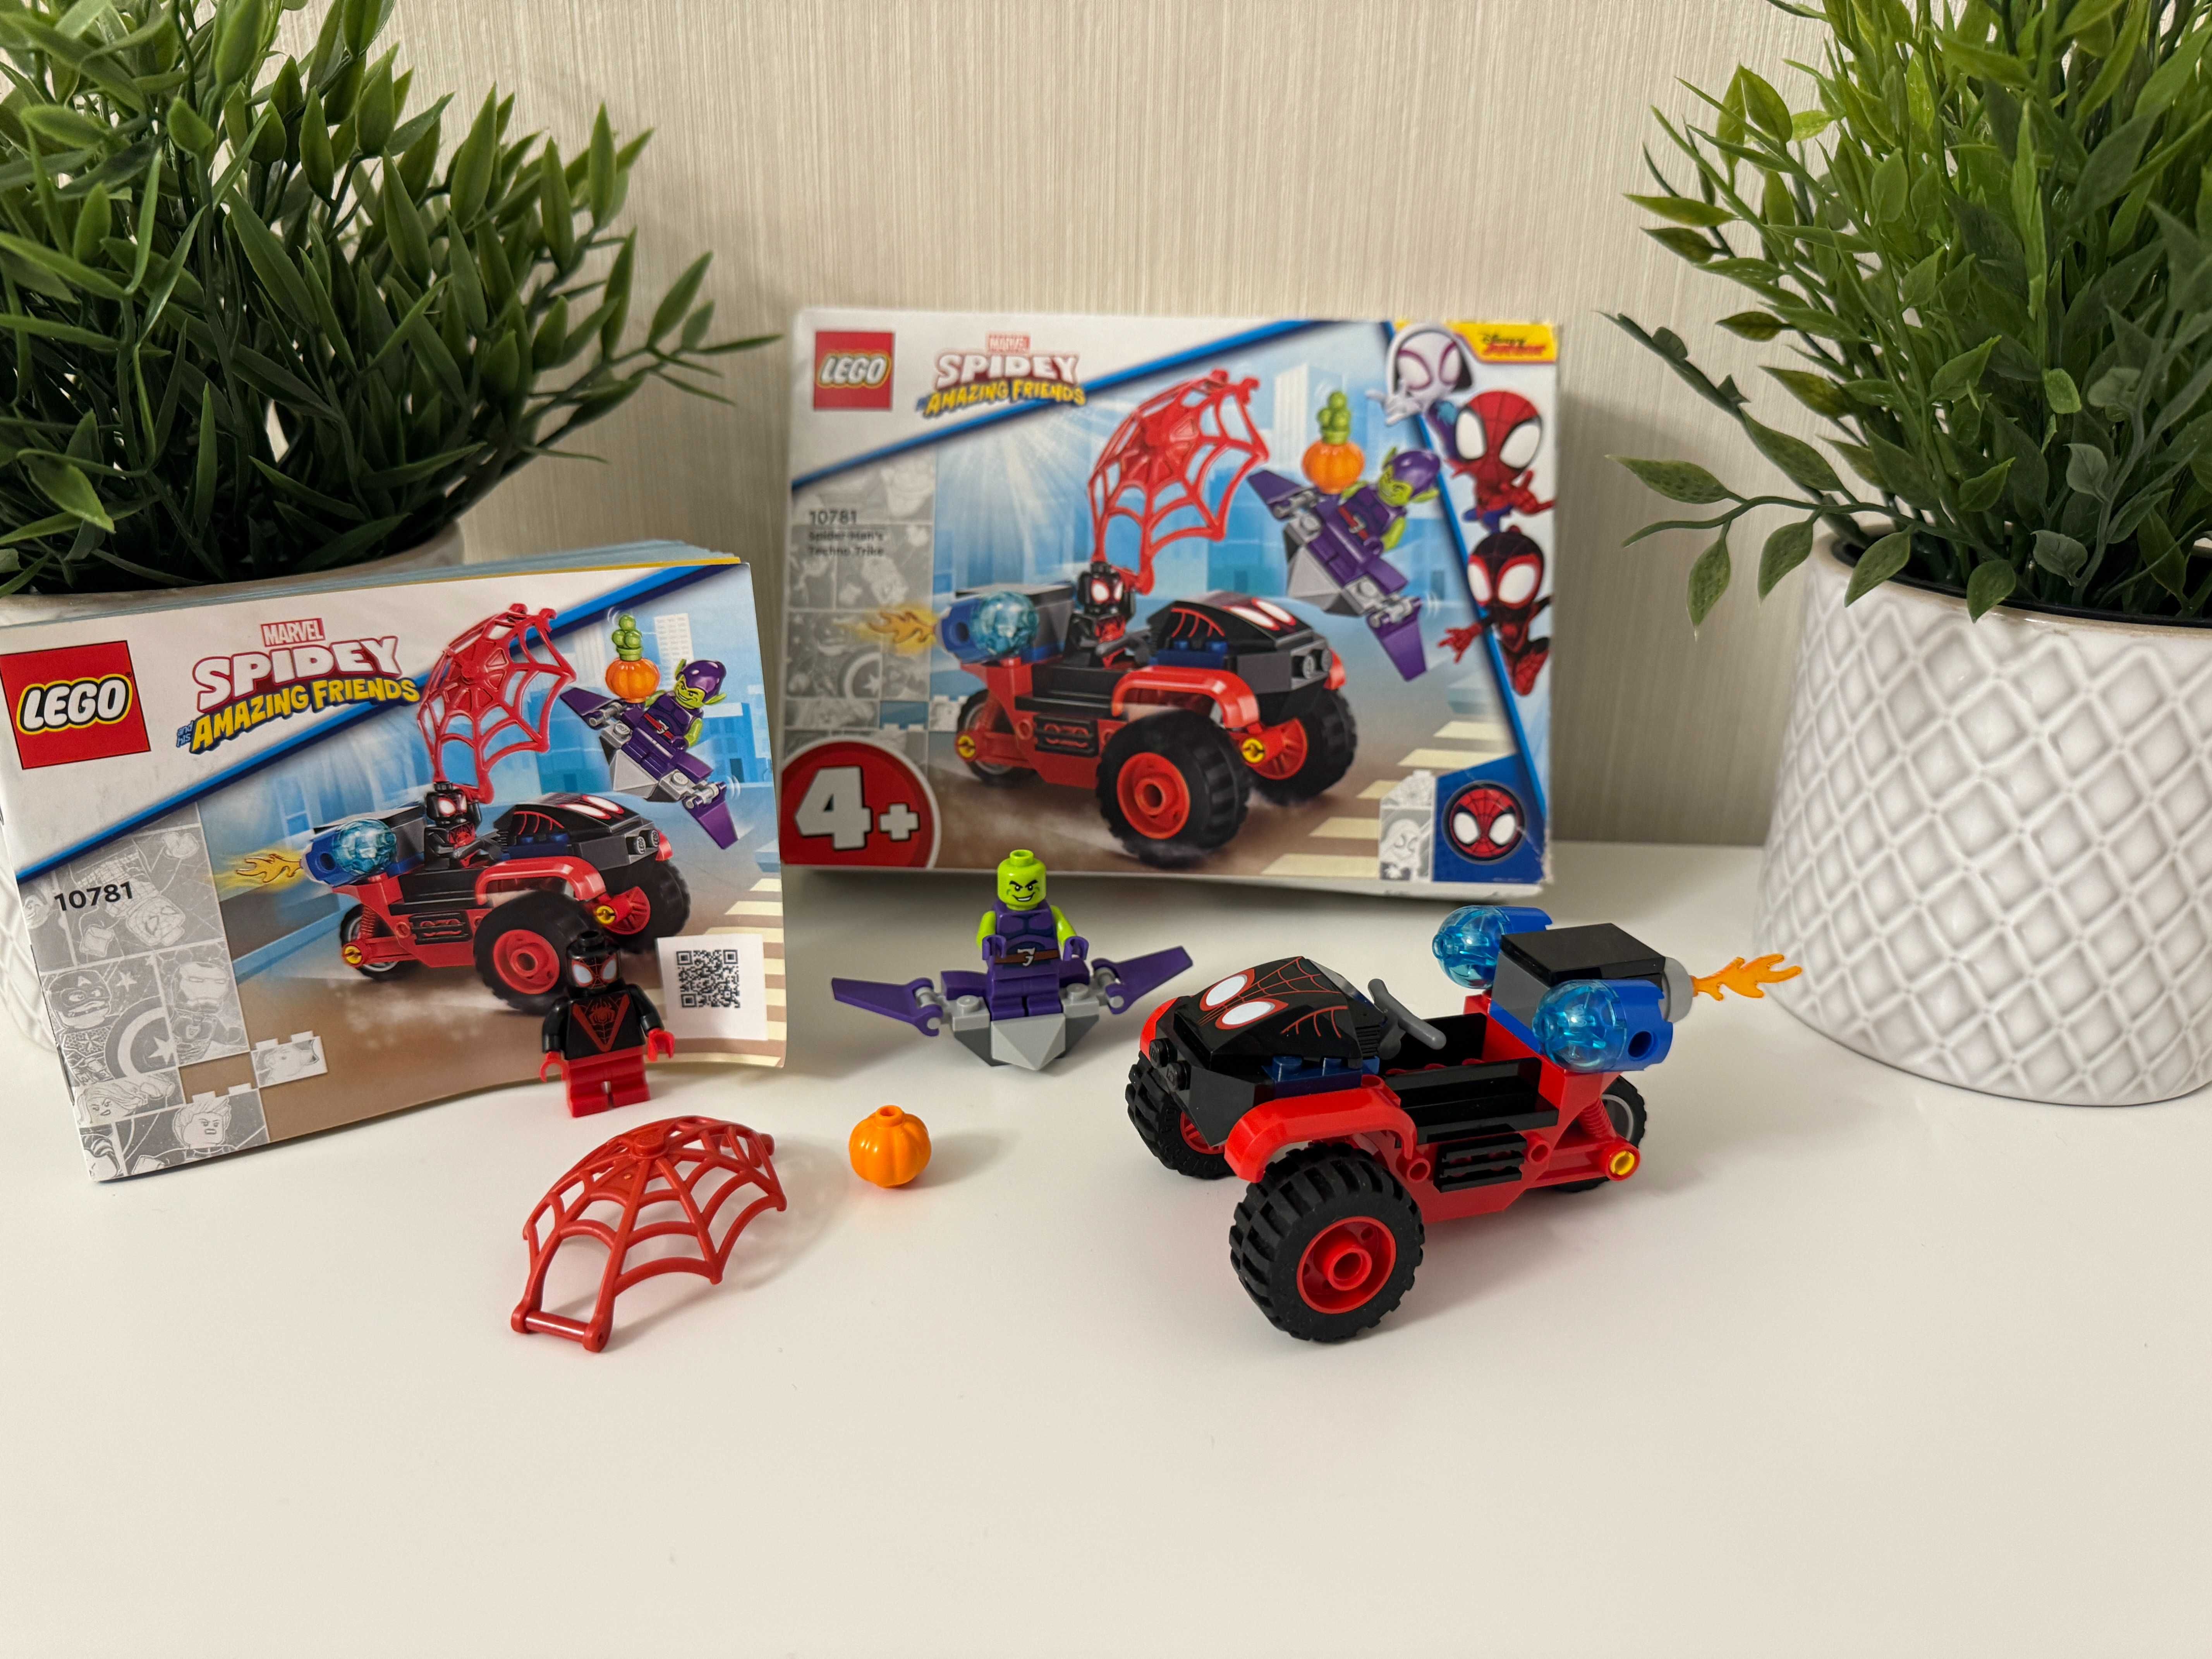 LEGO Super Heroes - Spidey Miles Morales Omul paianjen 10781, 59 piese